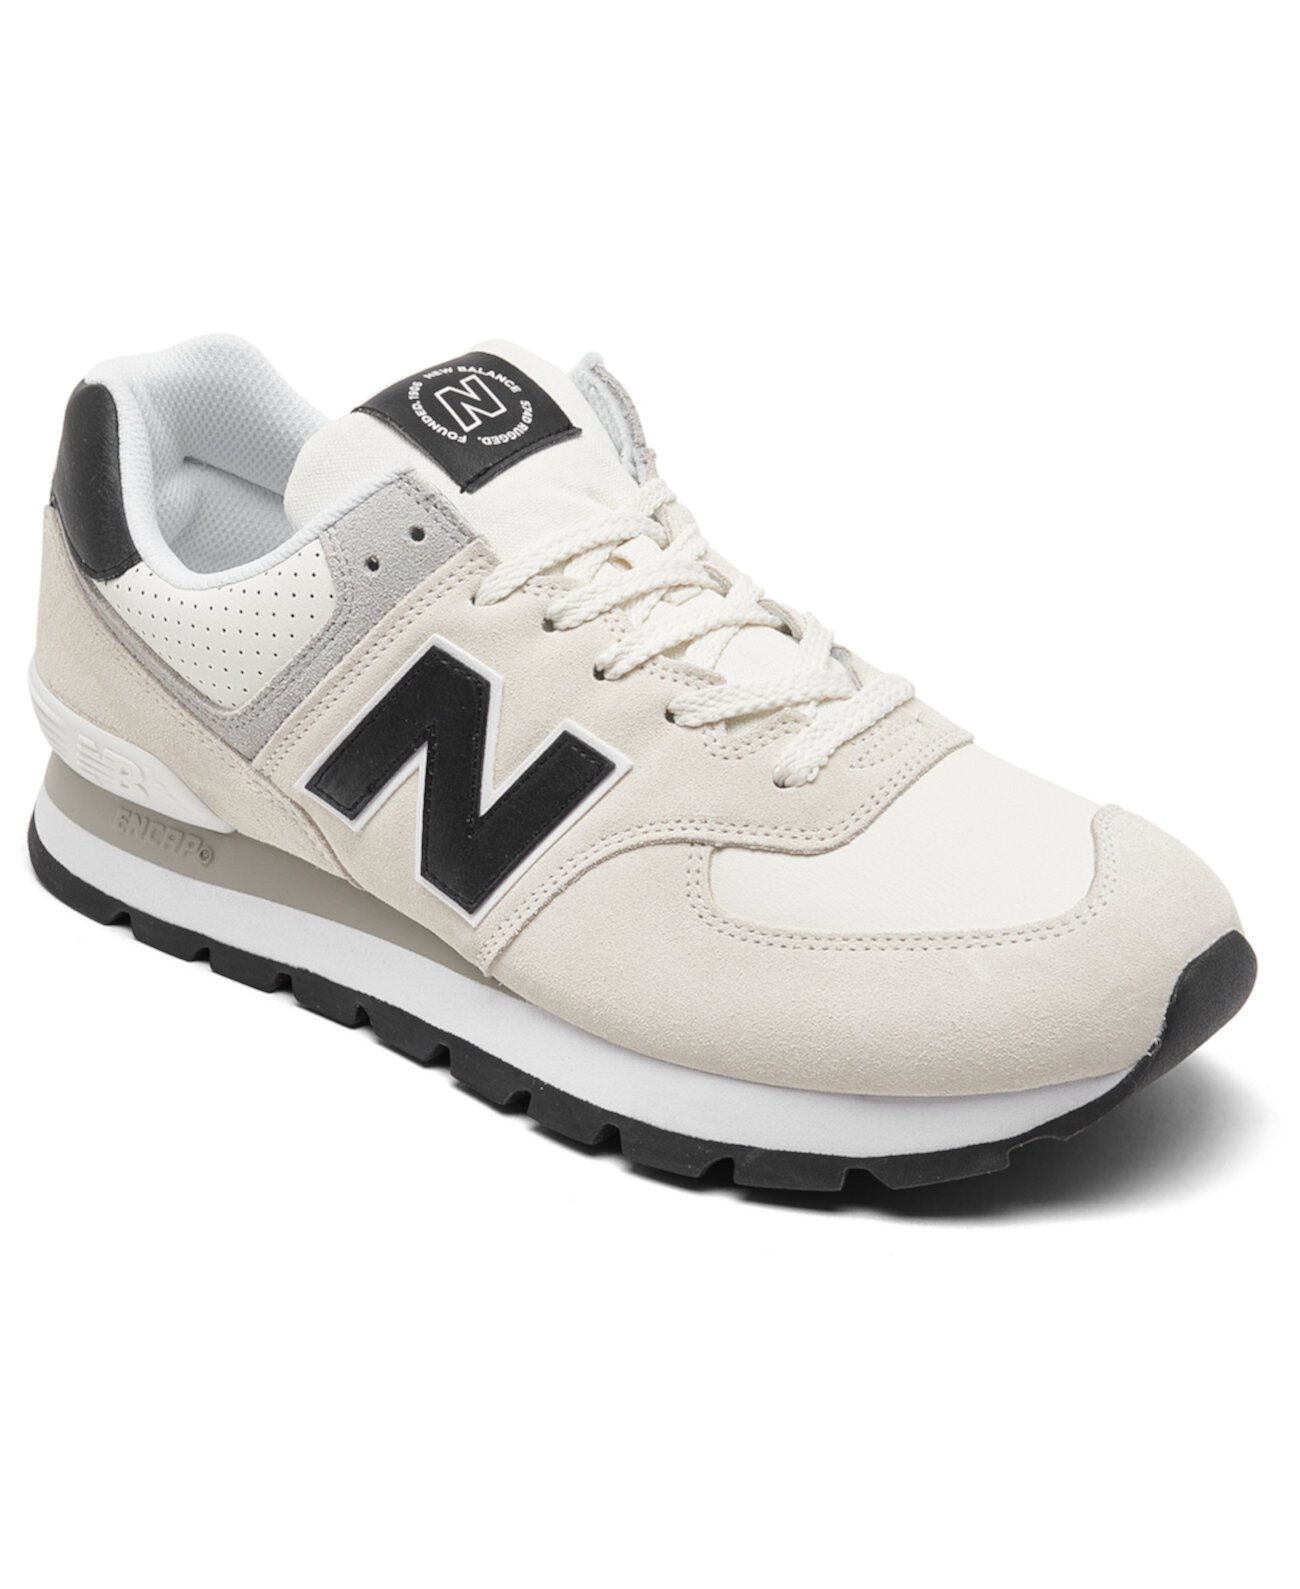 Men’s 574 Rugged Casual Sneakers from Finish Line New Balance